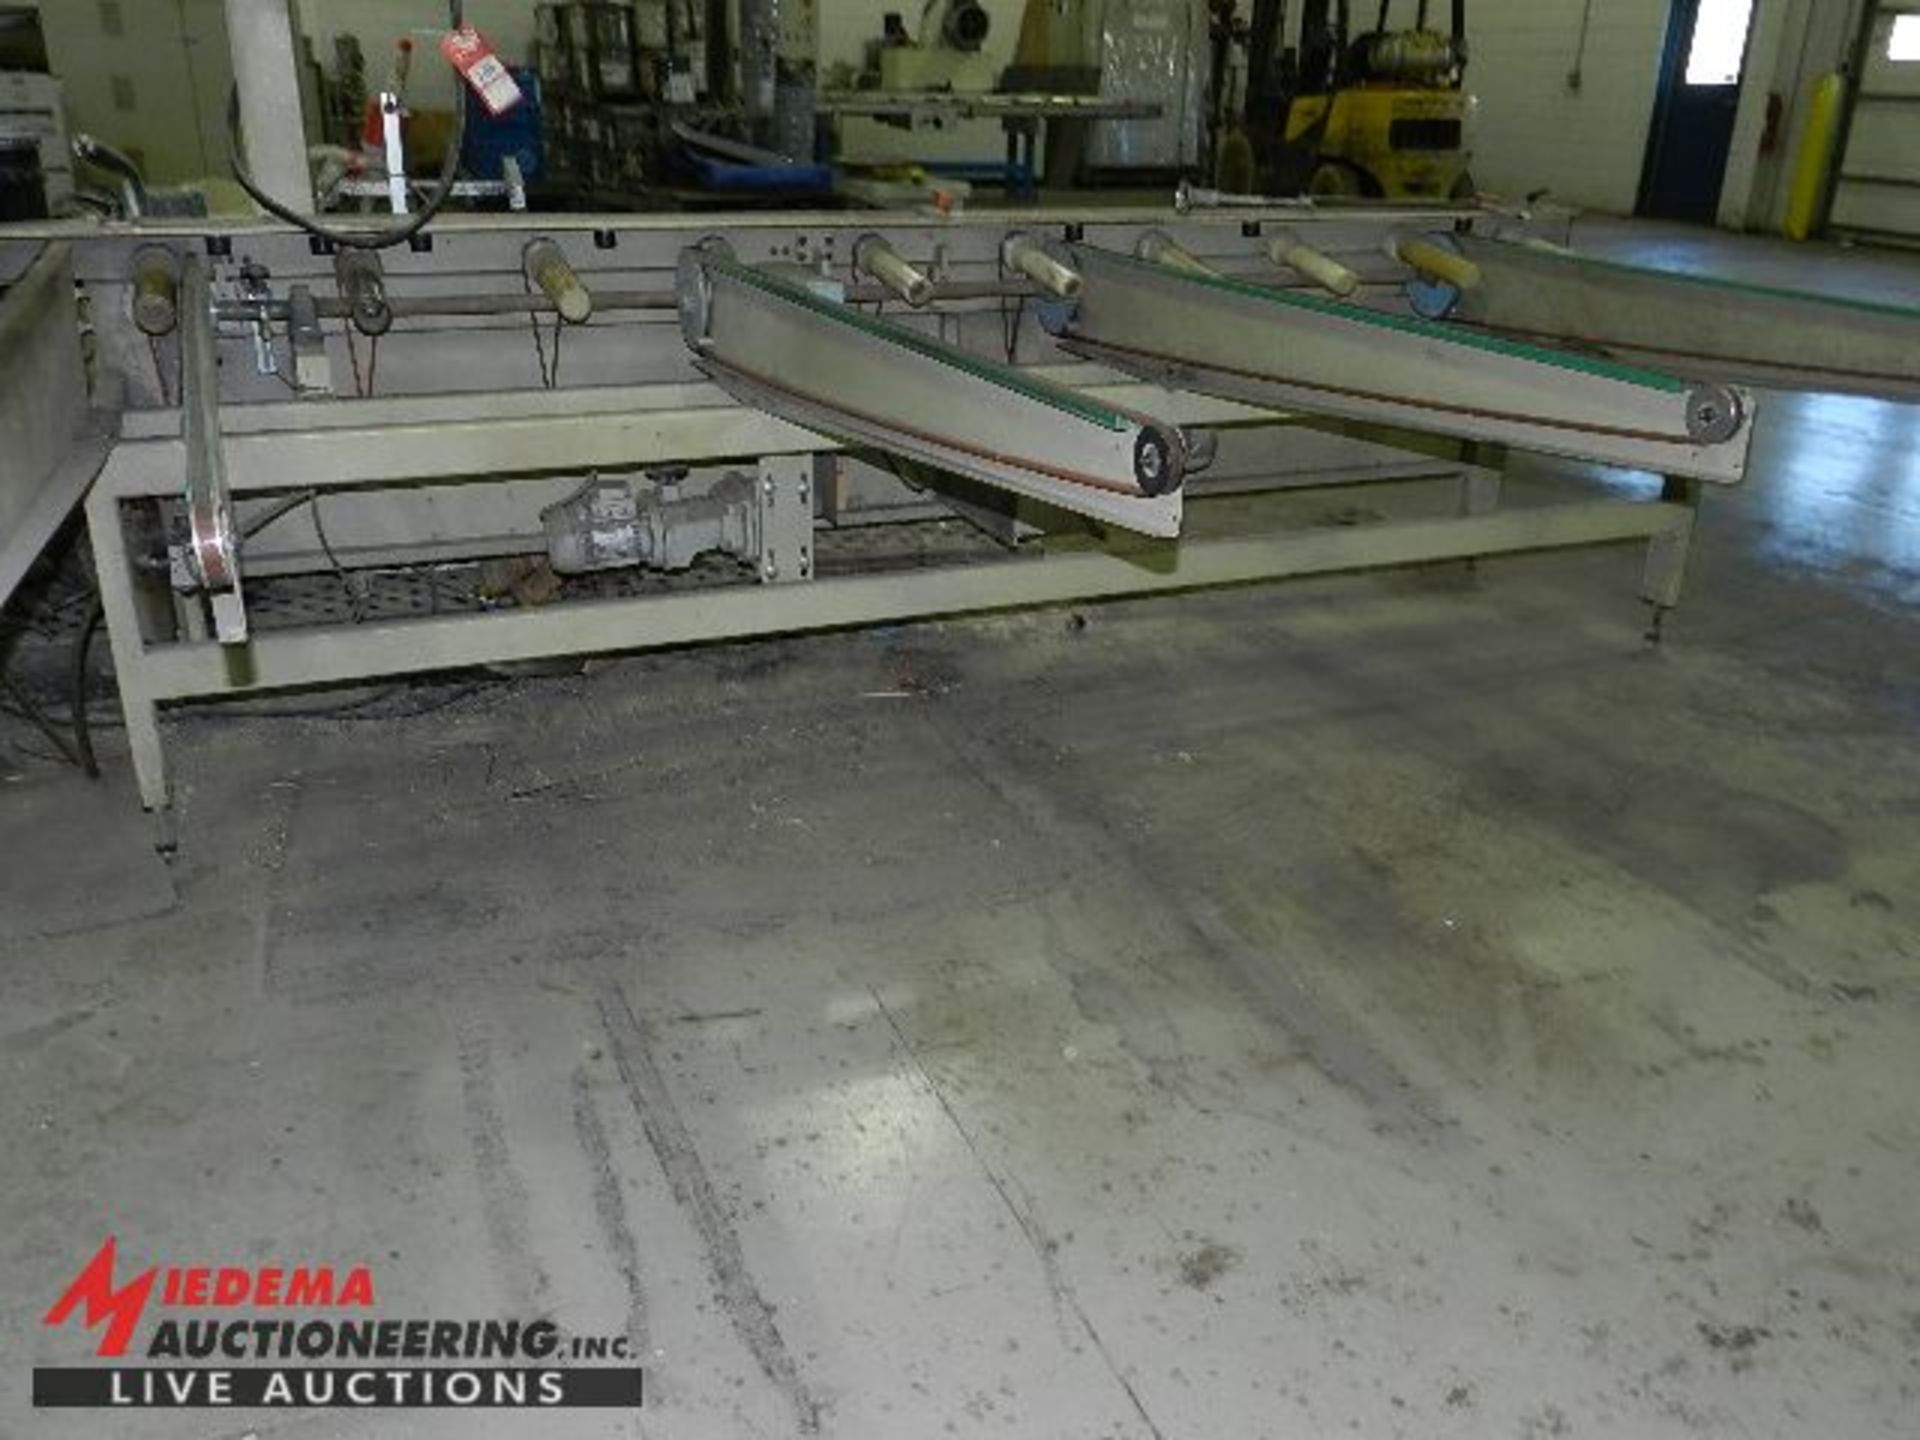 MAKOR C8 END FEED 10' TABLE, STACKER TABLE, 69" ARMS, APPROX 10' LENGTH - Image 4 of 4